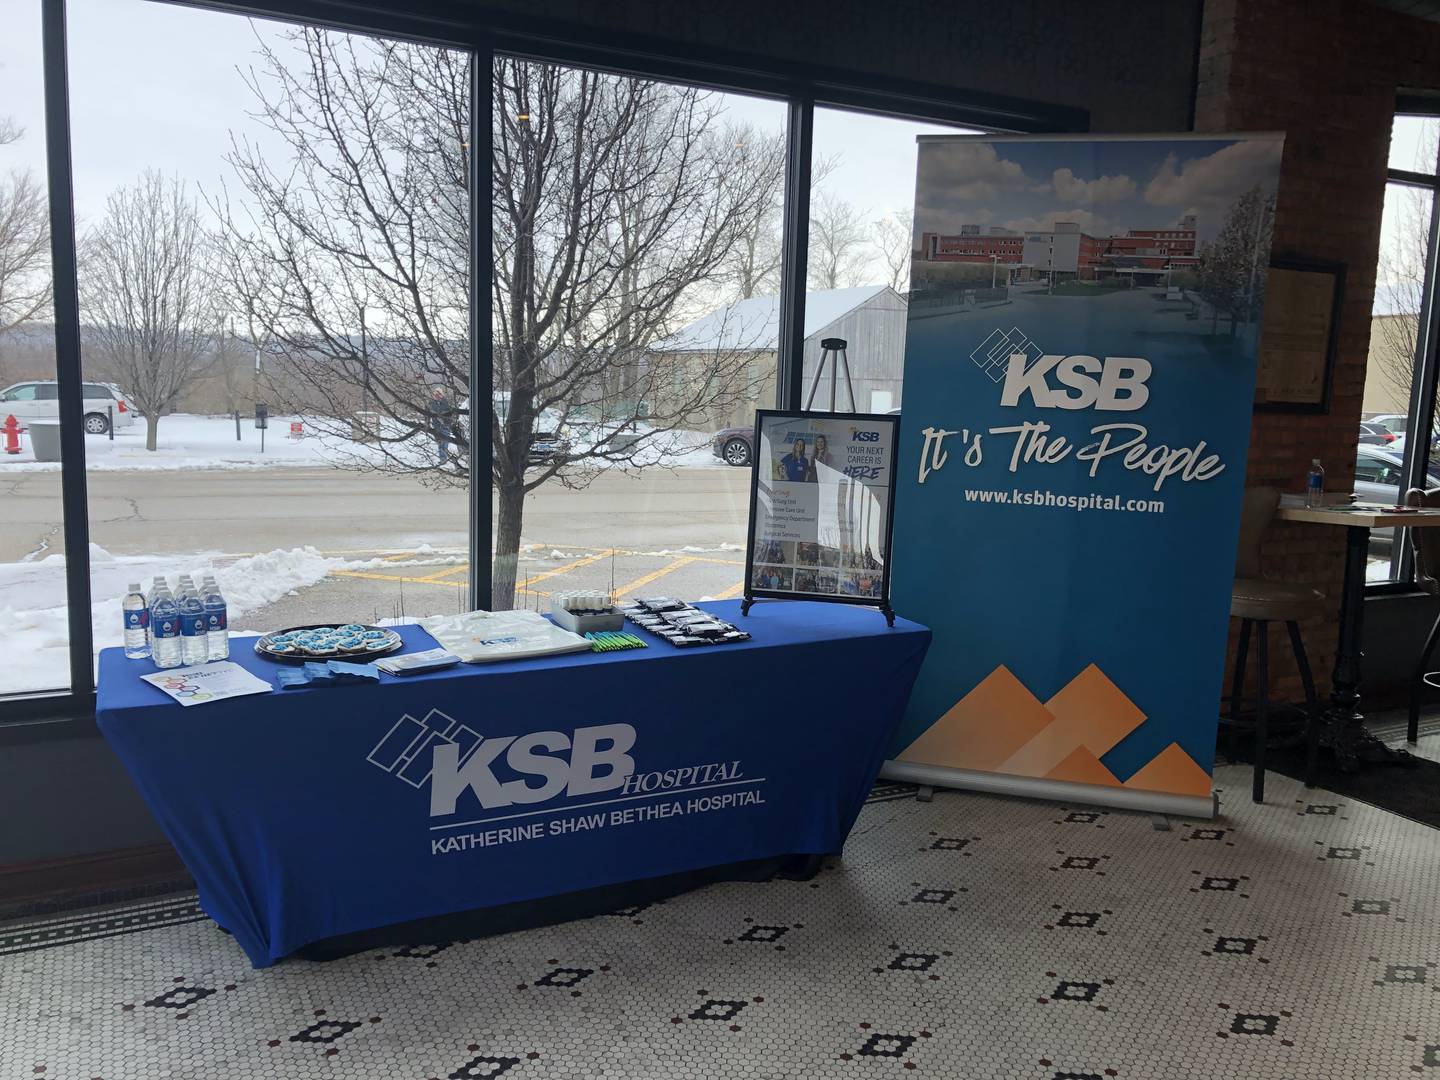 KSB Hospital in Dixon set up a welcome stand at its healthcare job fair Friday at the Auditorium Ballroom in downtown La Salle.